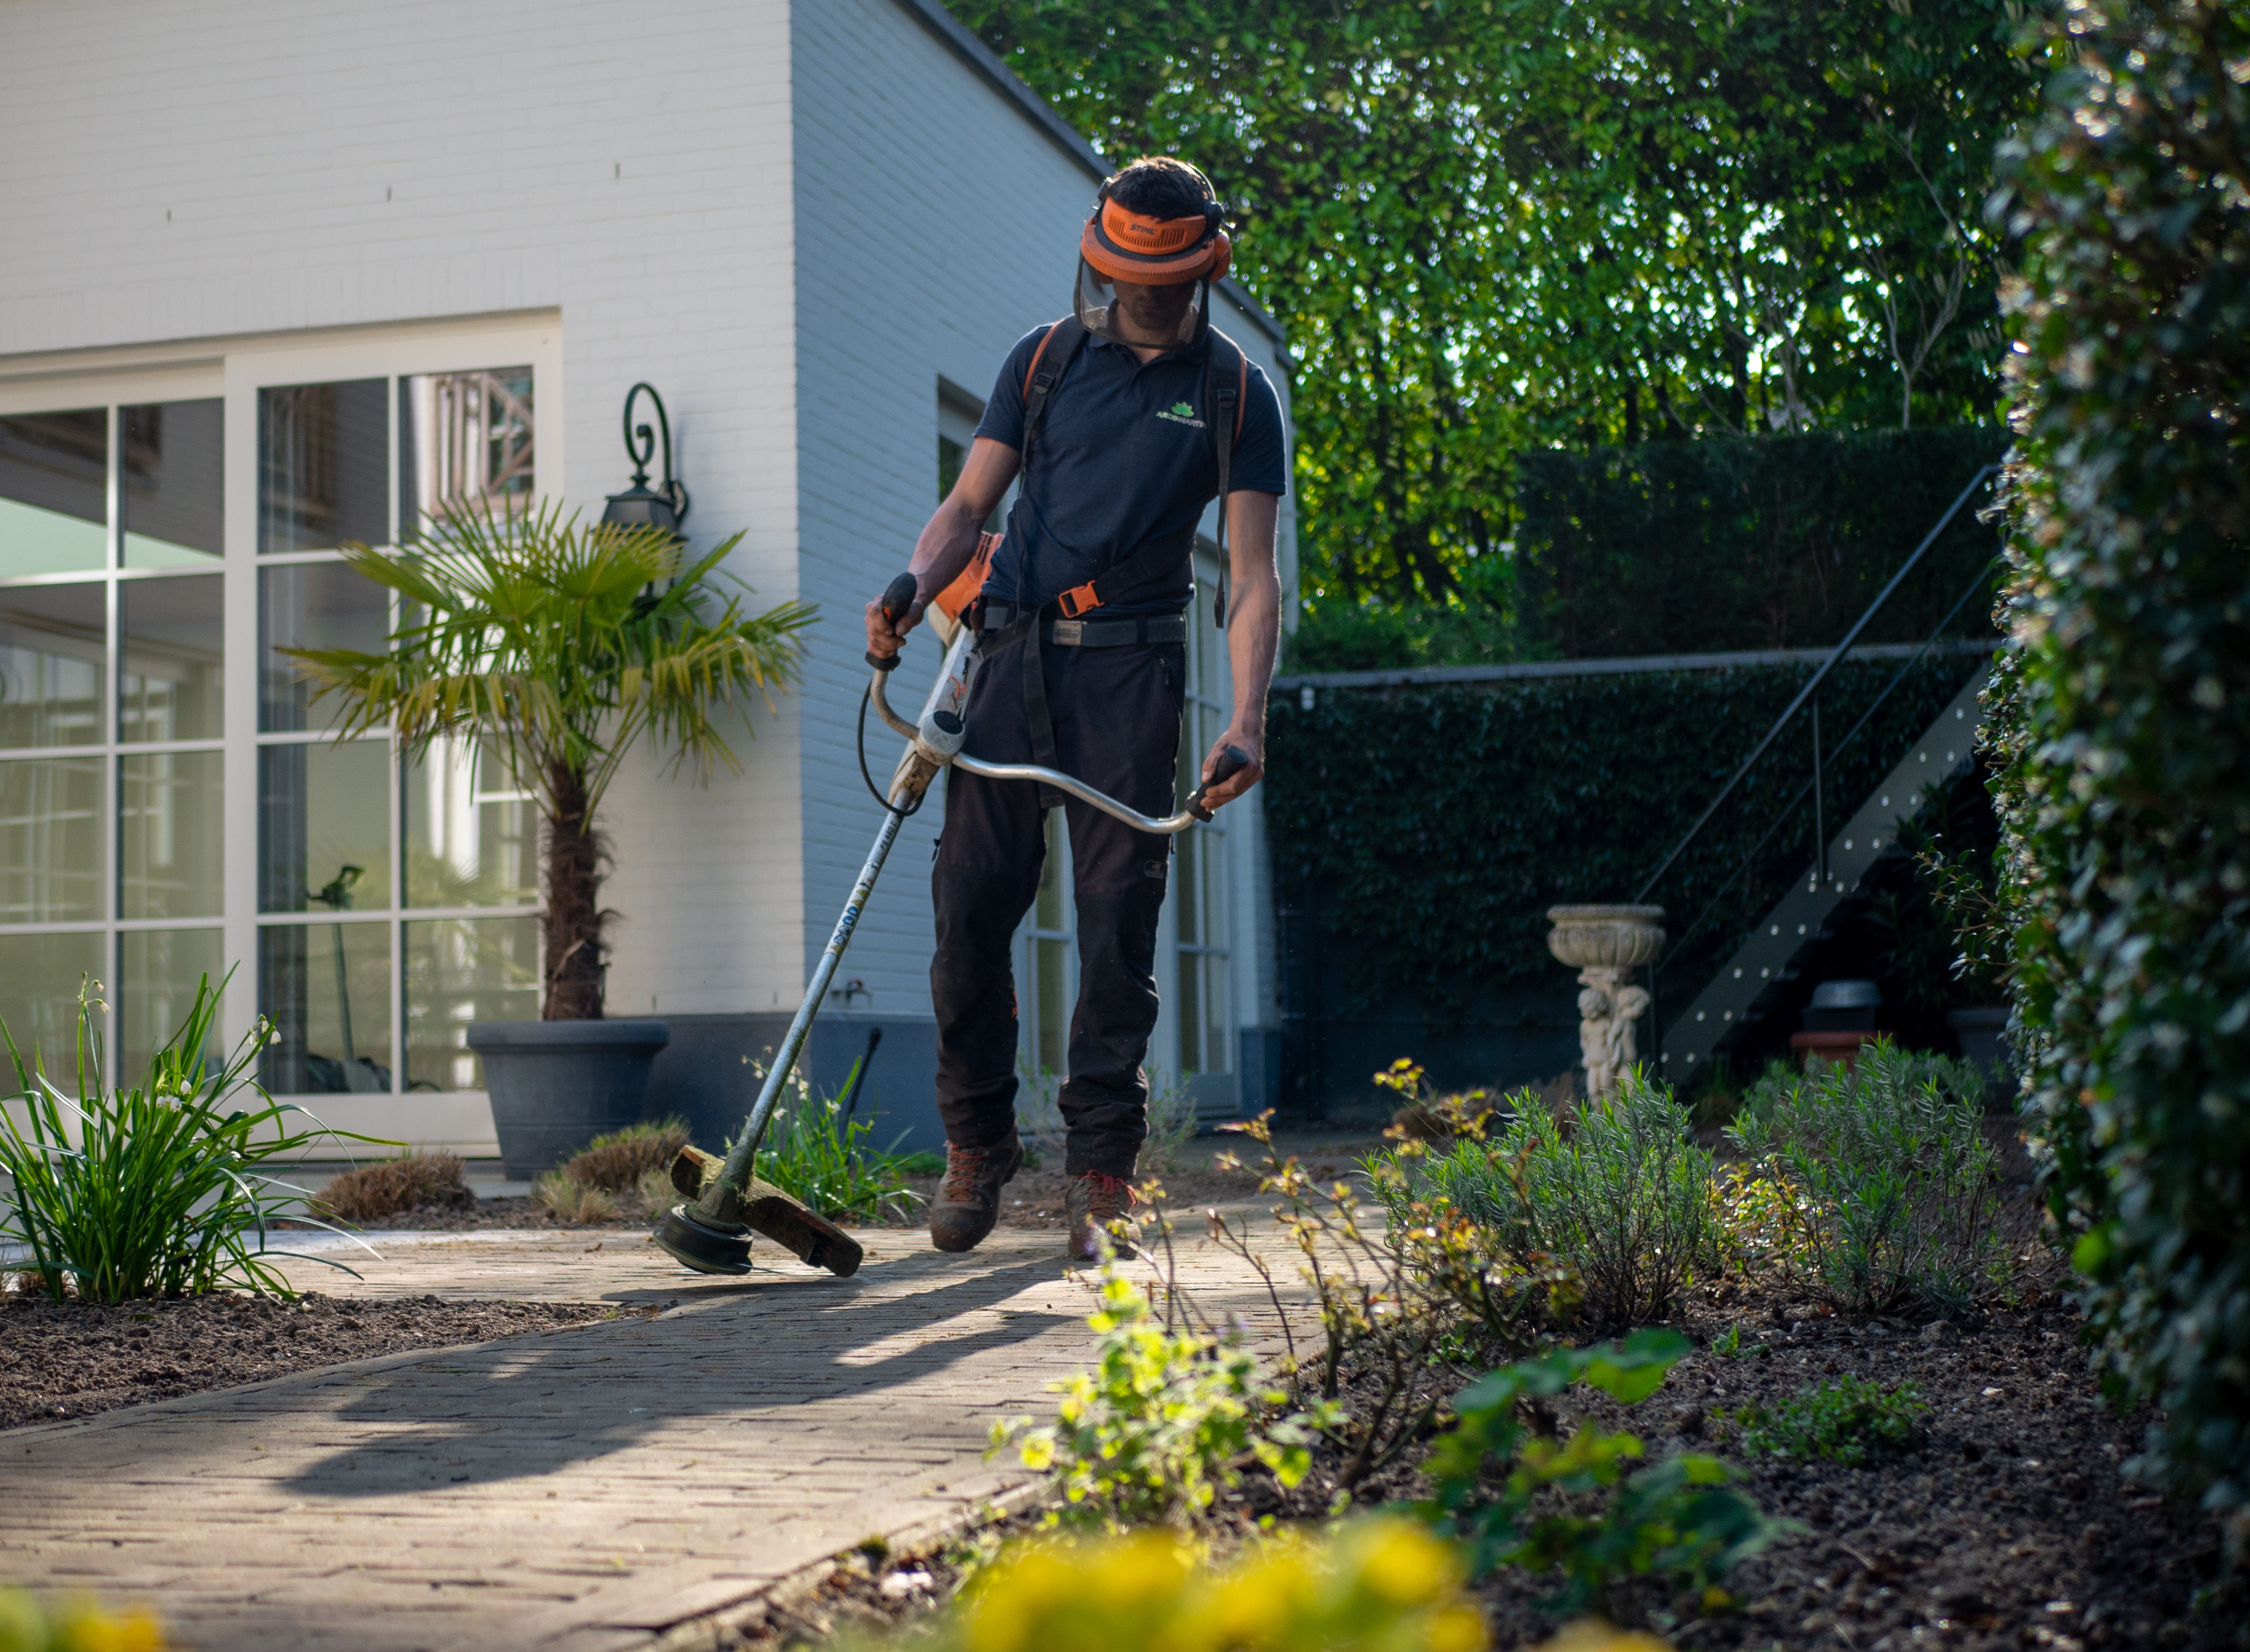 Bring on a gardener or landscaper to turn your backyard into the garden of your dreams!